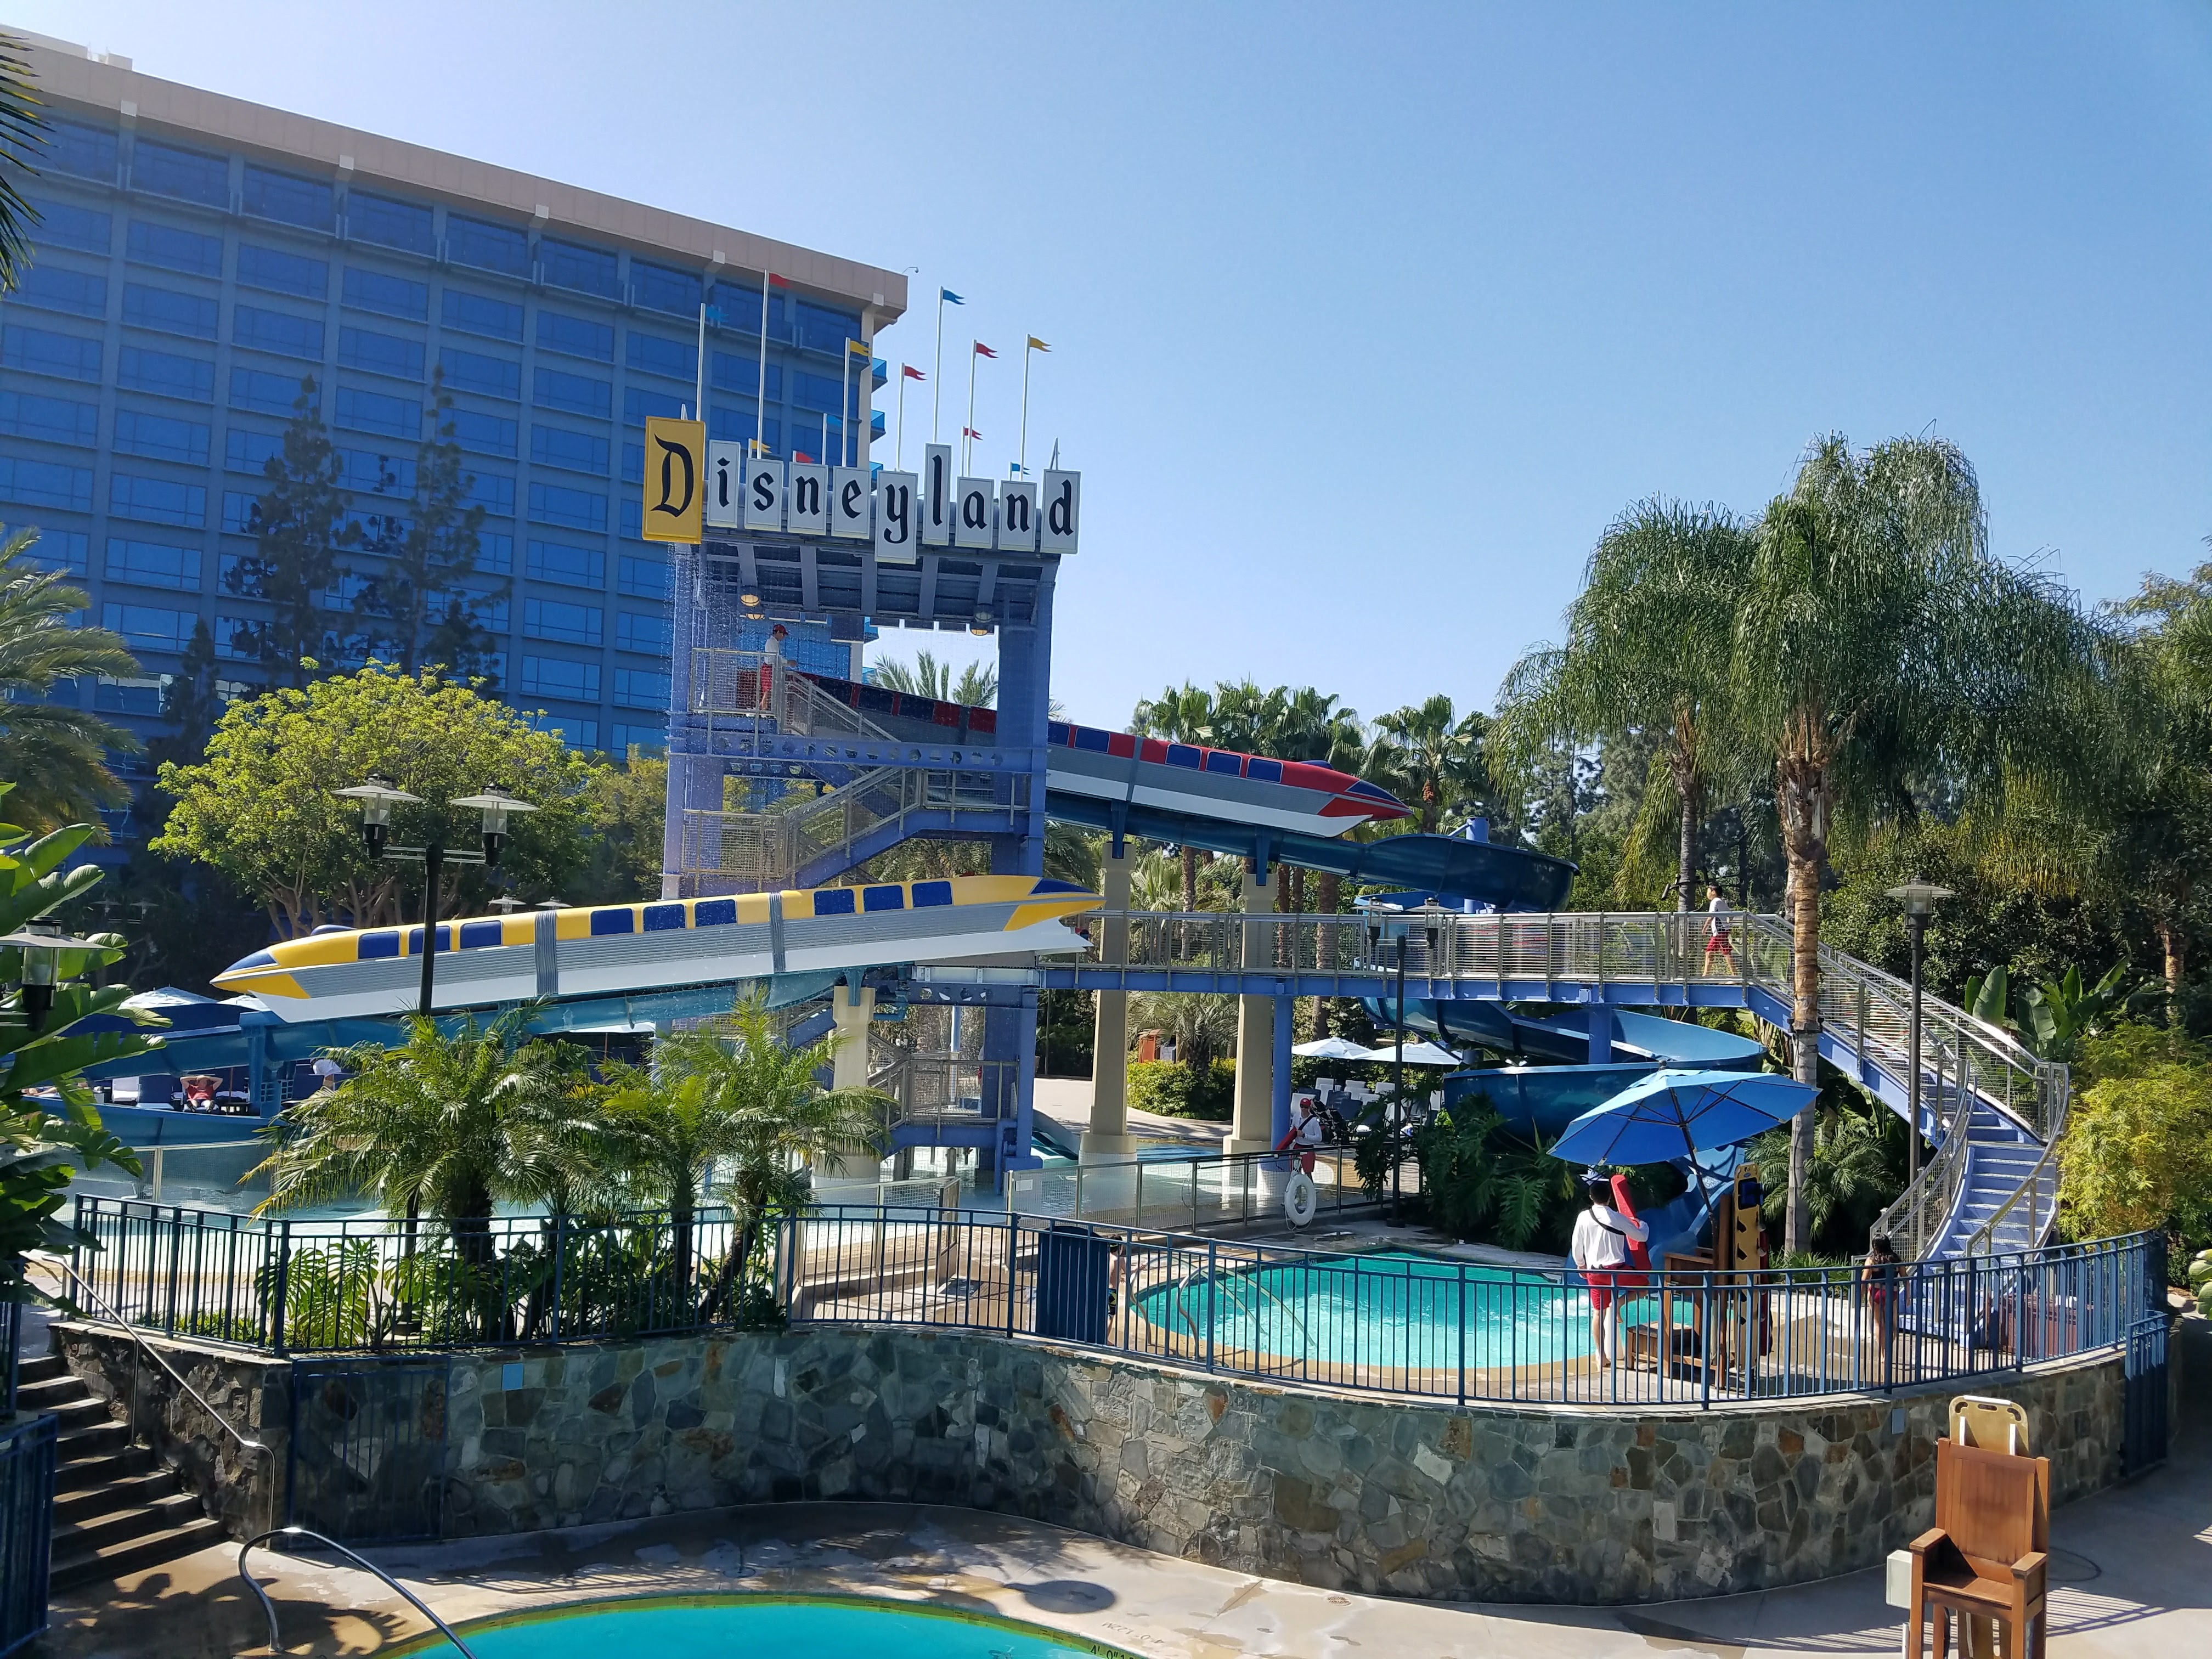 Picture of a place: Disneyland Hotel